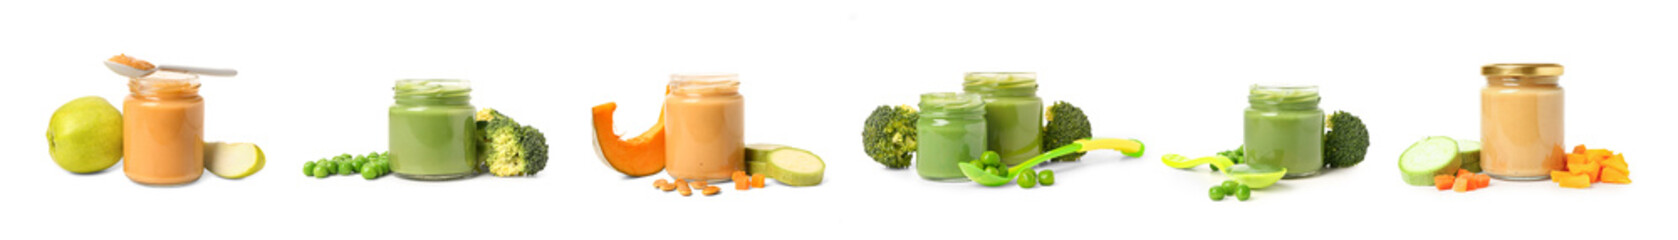 Set of healthy baby food in jars on white background